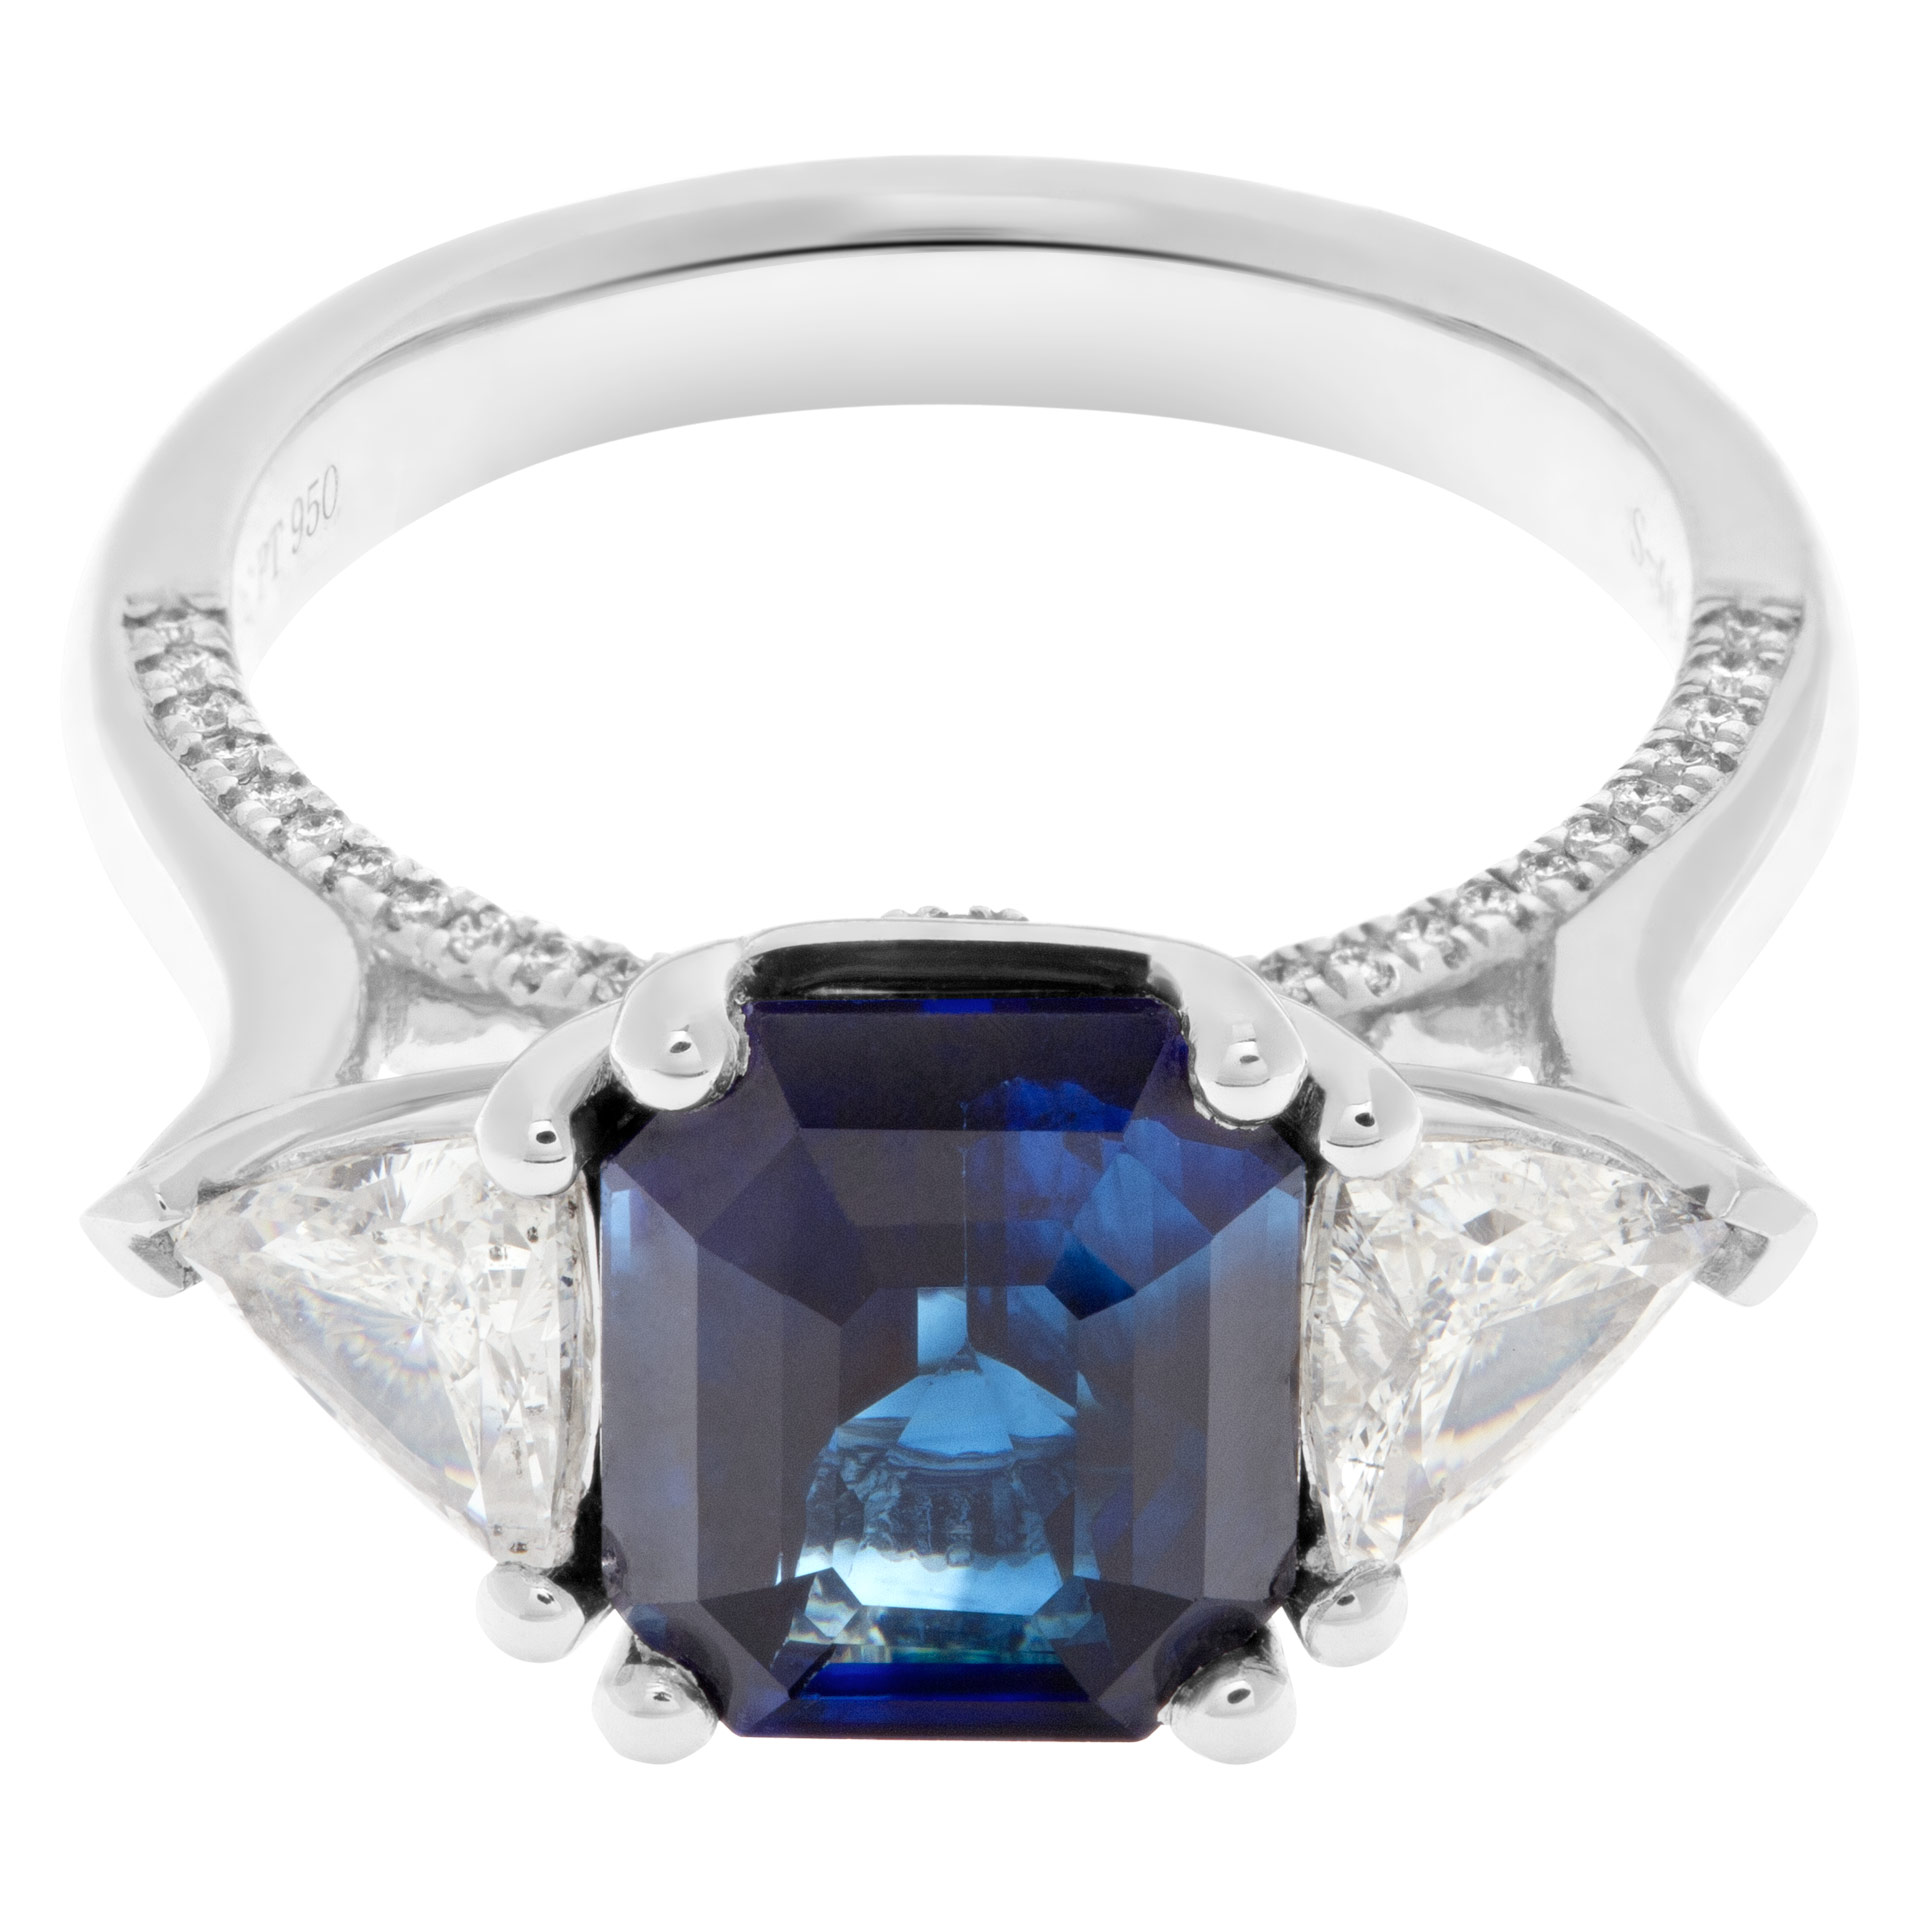 Stunning blue sapphire and diamond ring in platinum with 4.49 carats in central sapphire and 1.01 carats in side triangle cut diamonds image 3